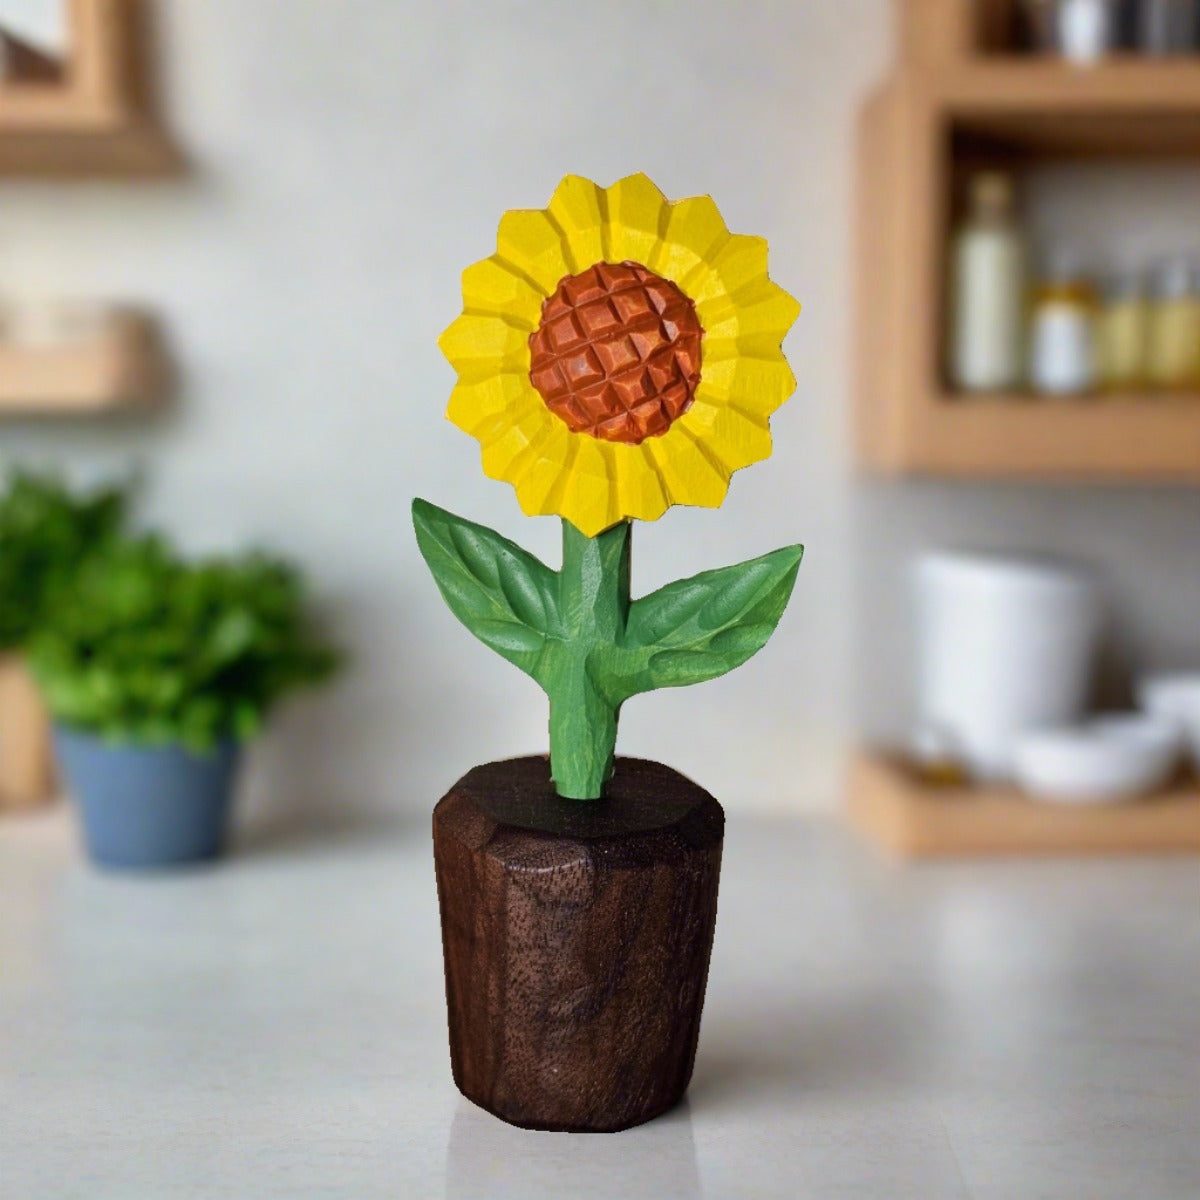 Elegant Sunflower Wooden Sculpture | Hand-Carved & Painted With Gift Box Packing - Wooden Islands